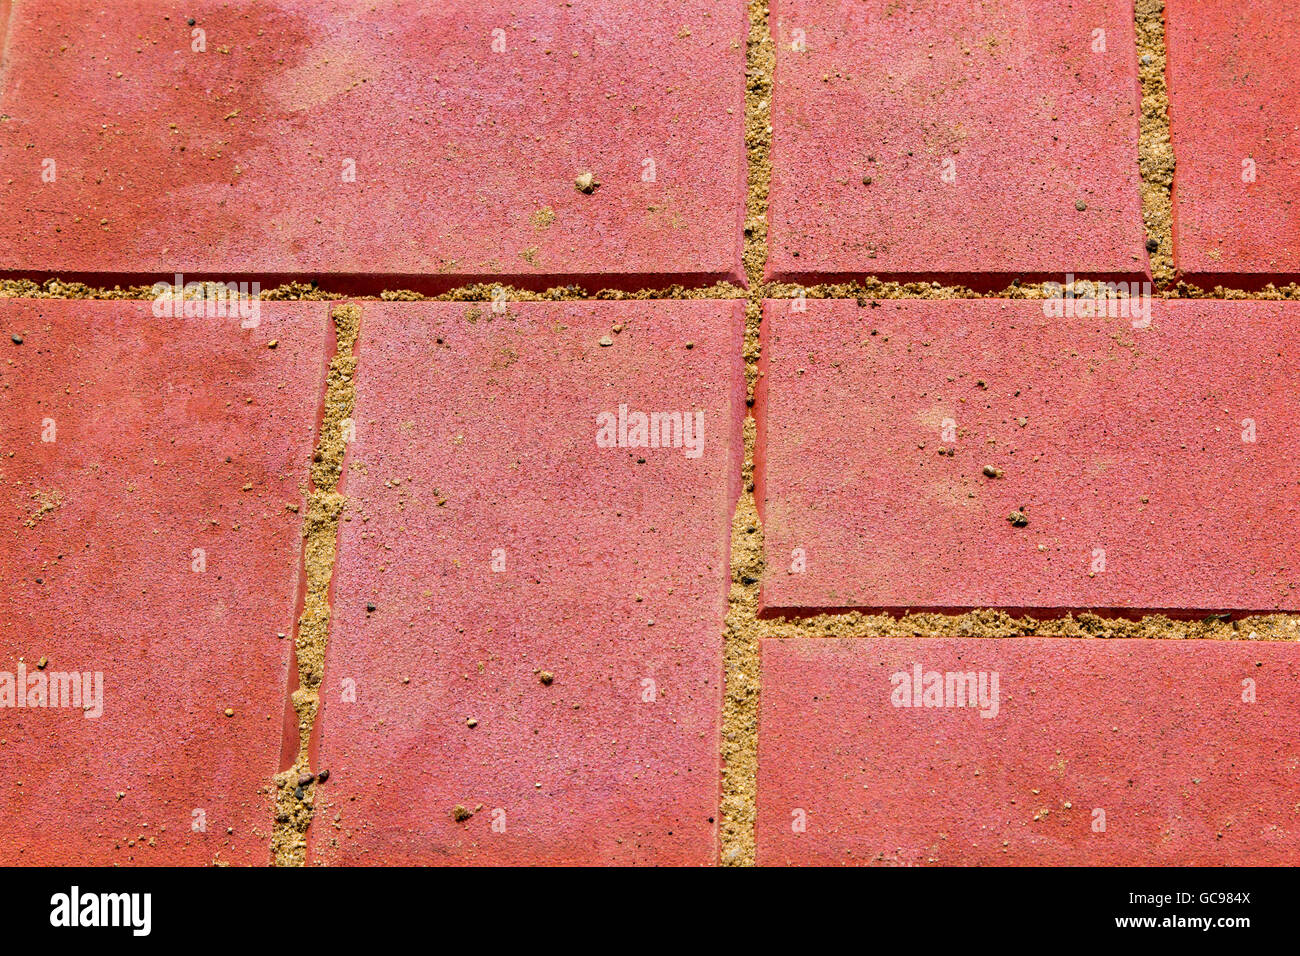 red concrete paving slabs with sand close up Stock Photo